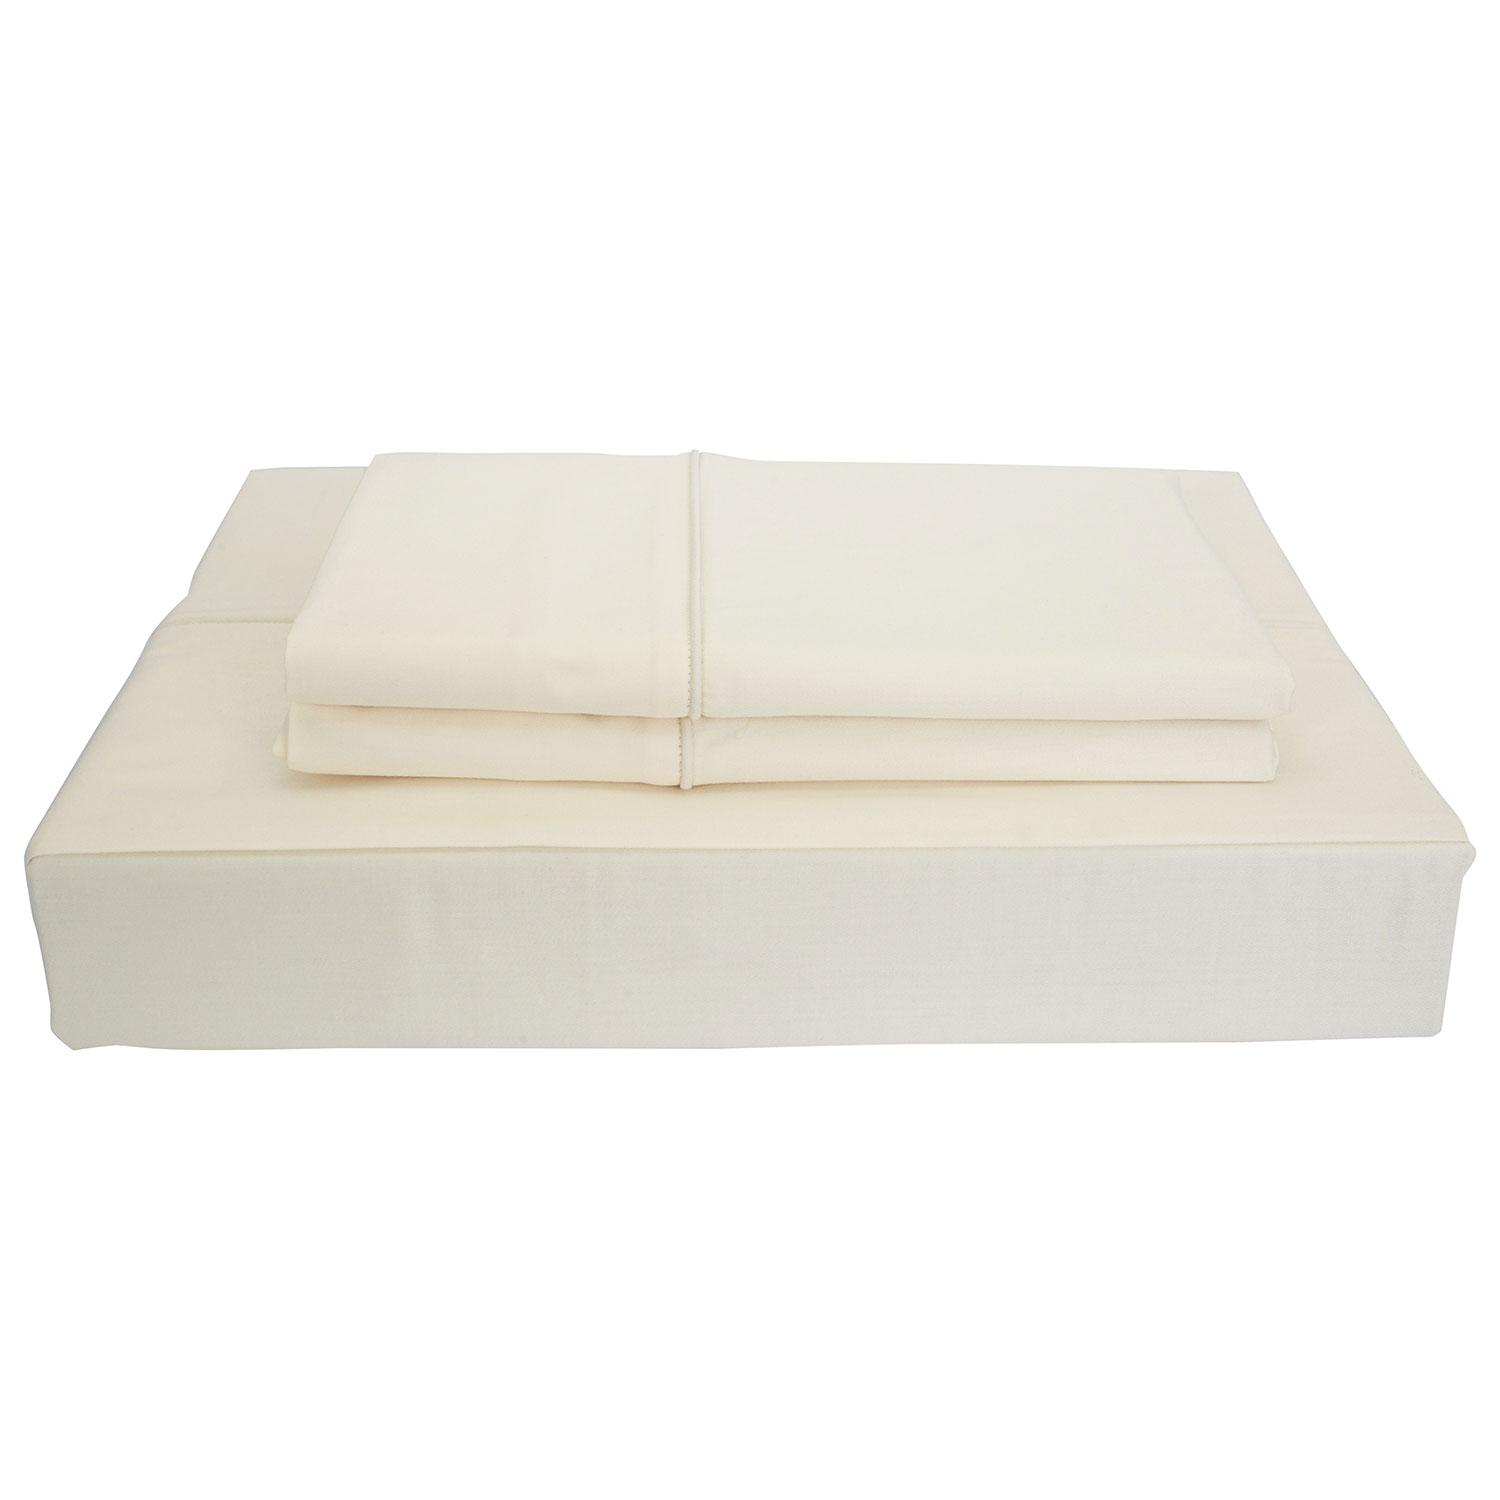 Maholi Duncan Collection 620 Thread Count Egyptian Cotton Sheet Set - King - Ivory